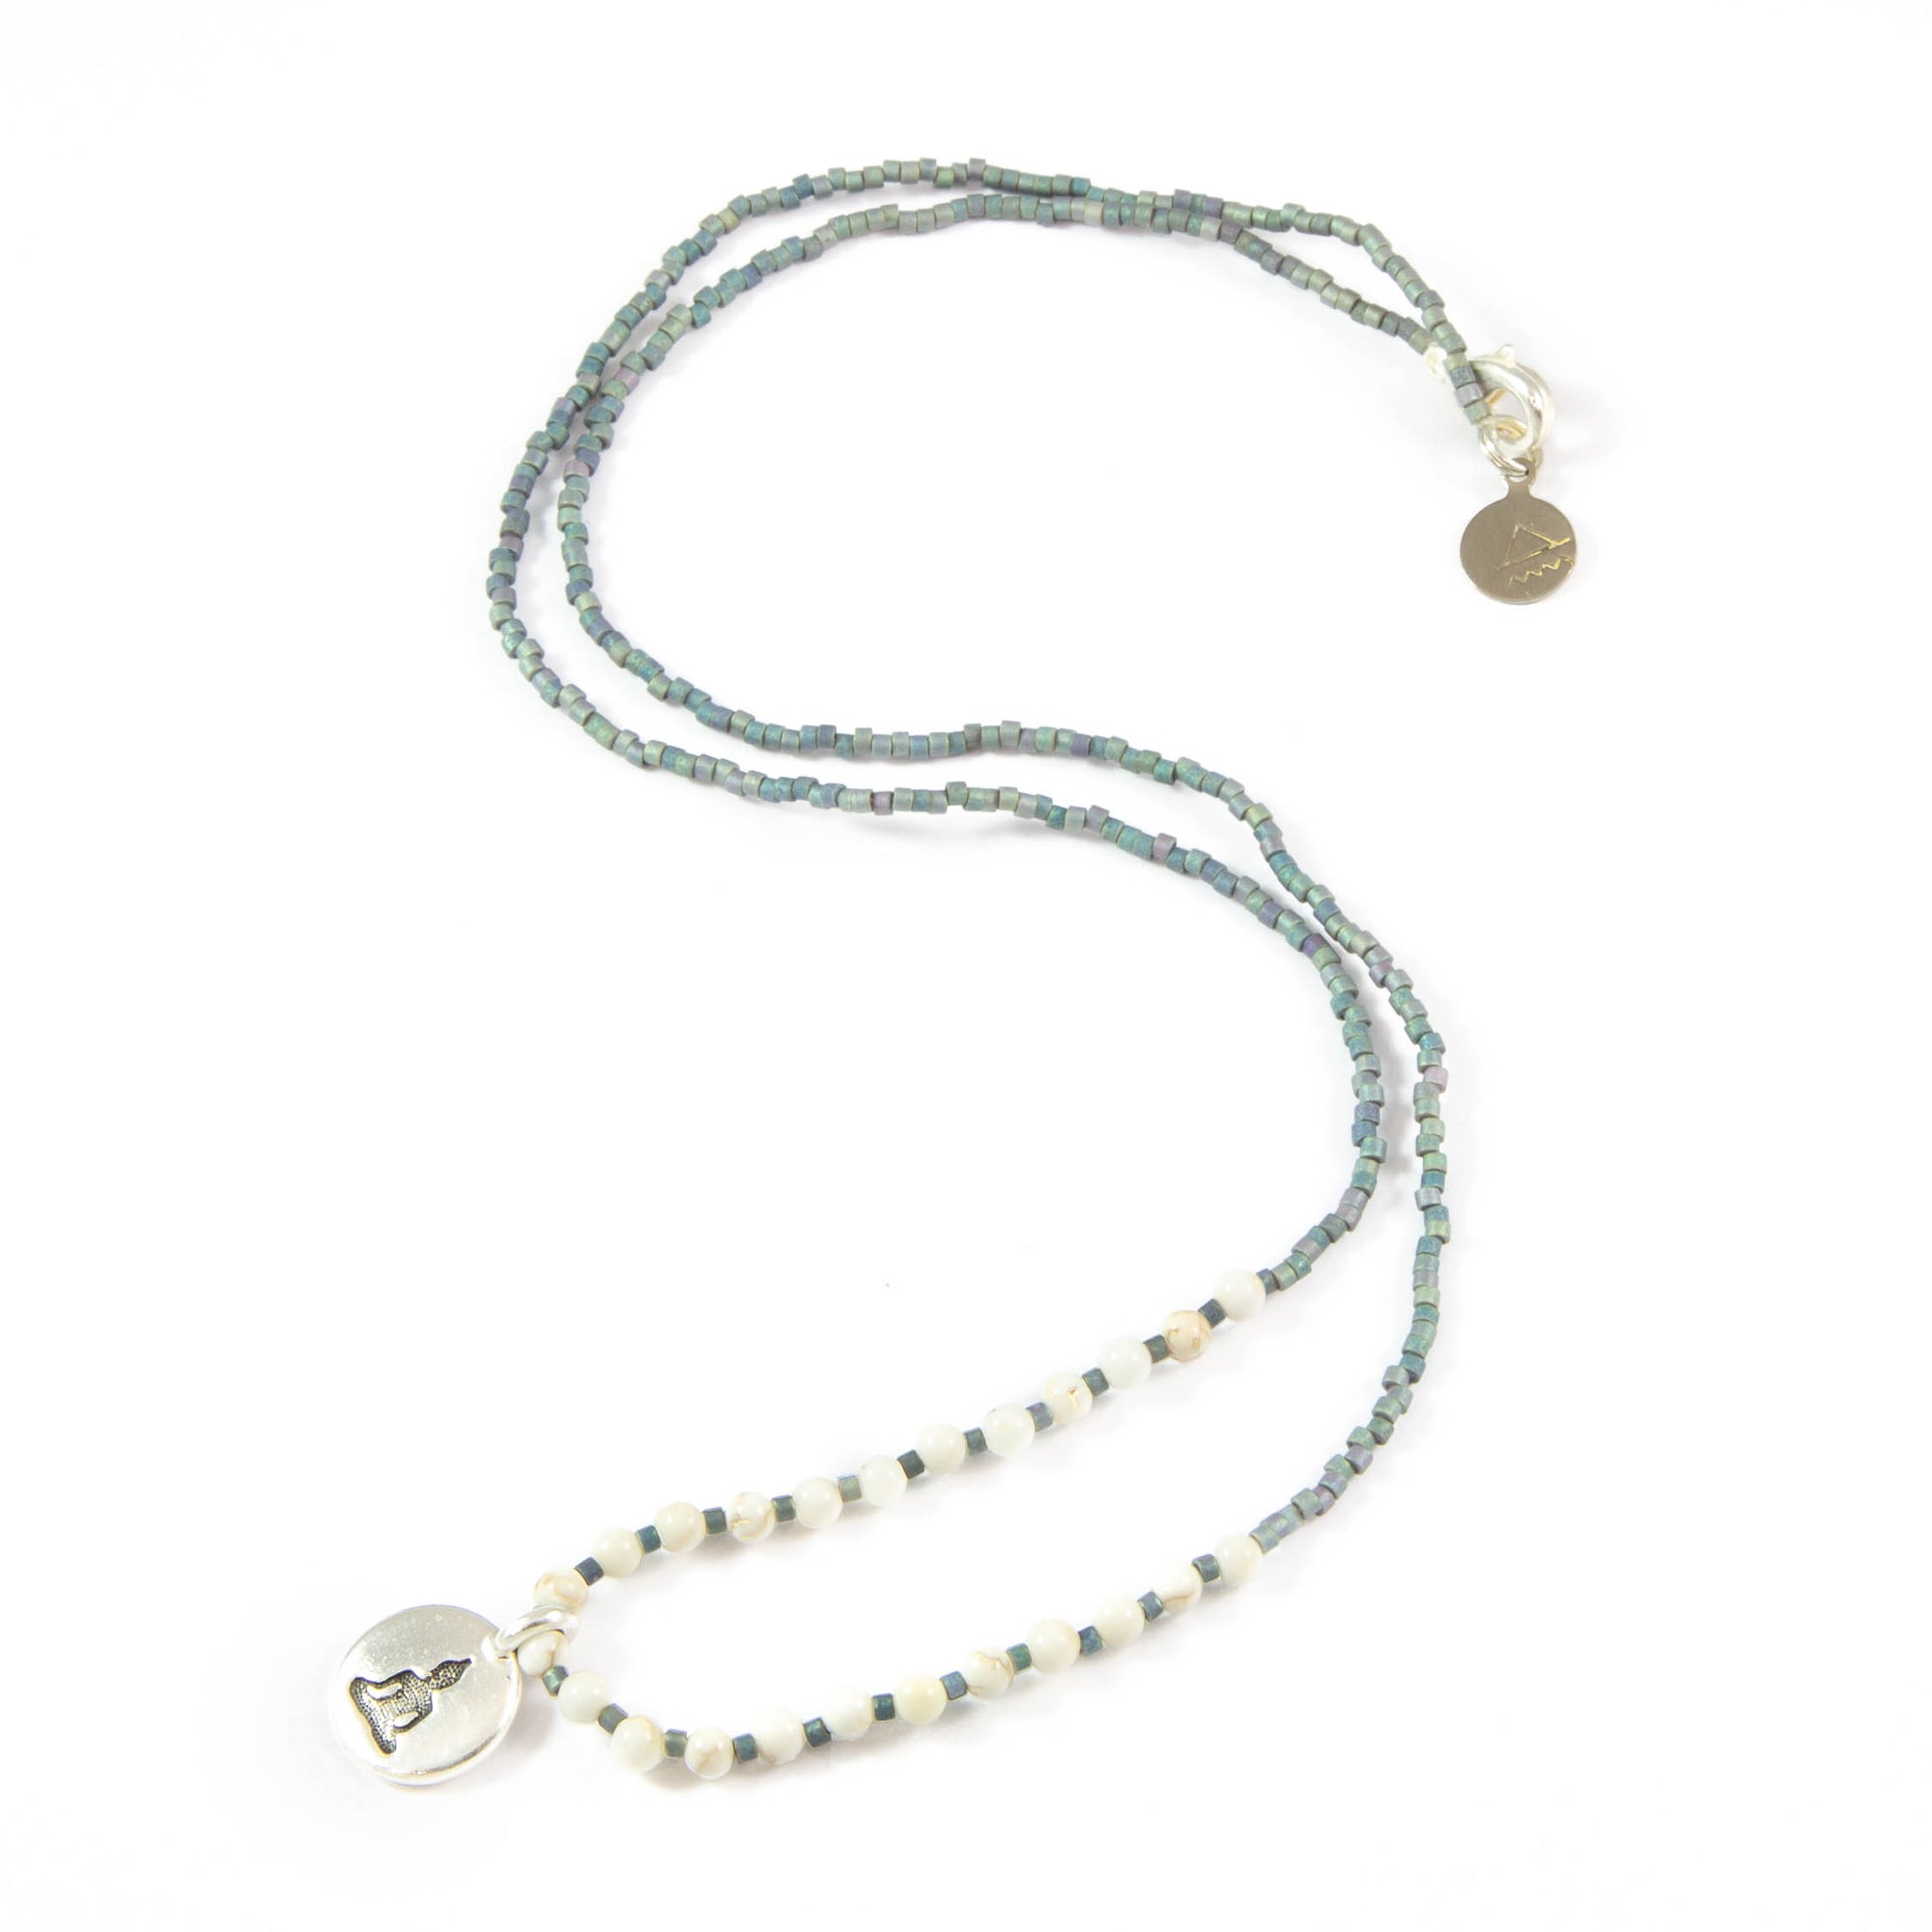 Denim w/ White Turquoise Stone Buddha Charm Necklace in Silver